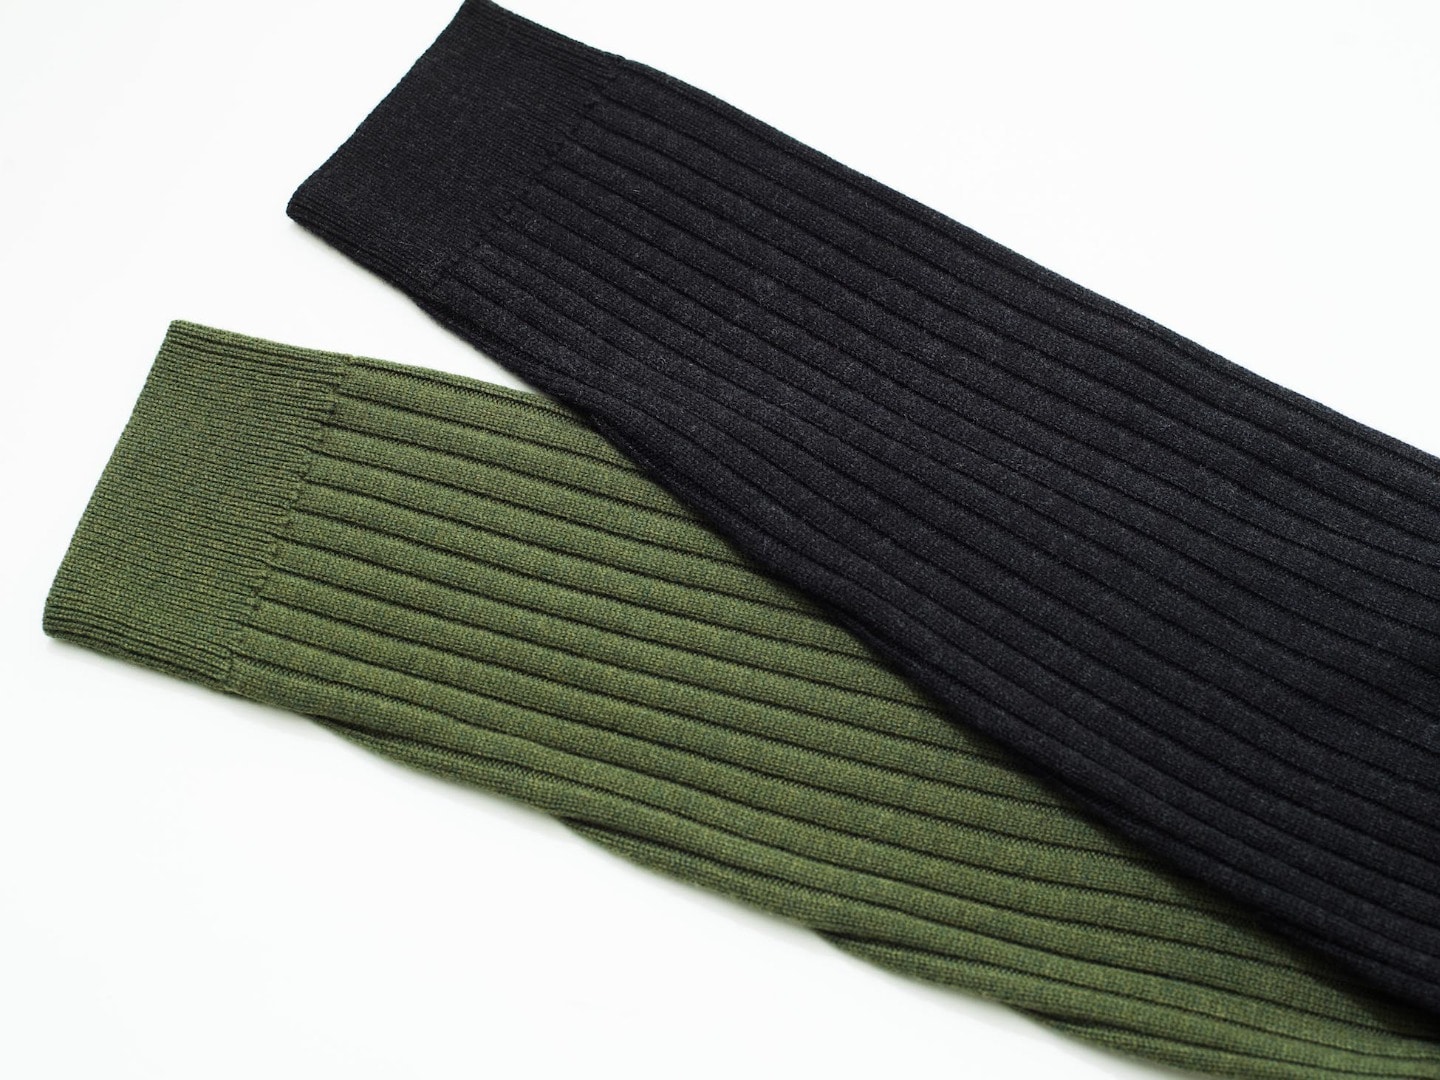 A.P.C. for Ron Herman Military Knit 9.23(Thu) New Arrival News 